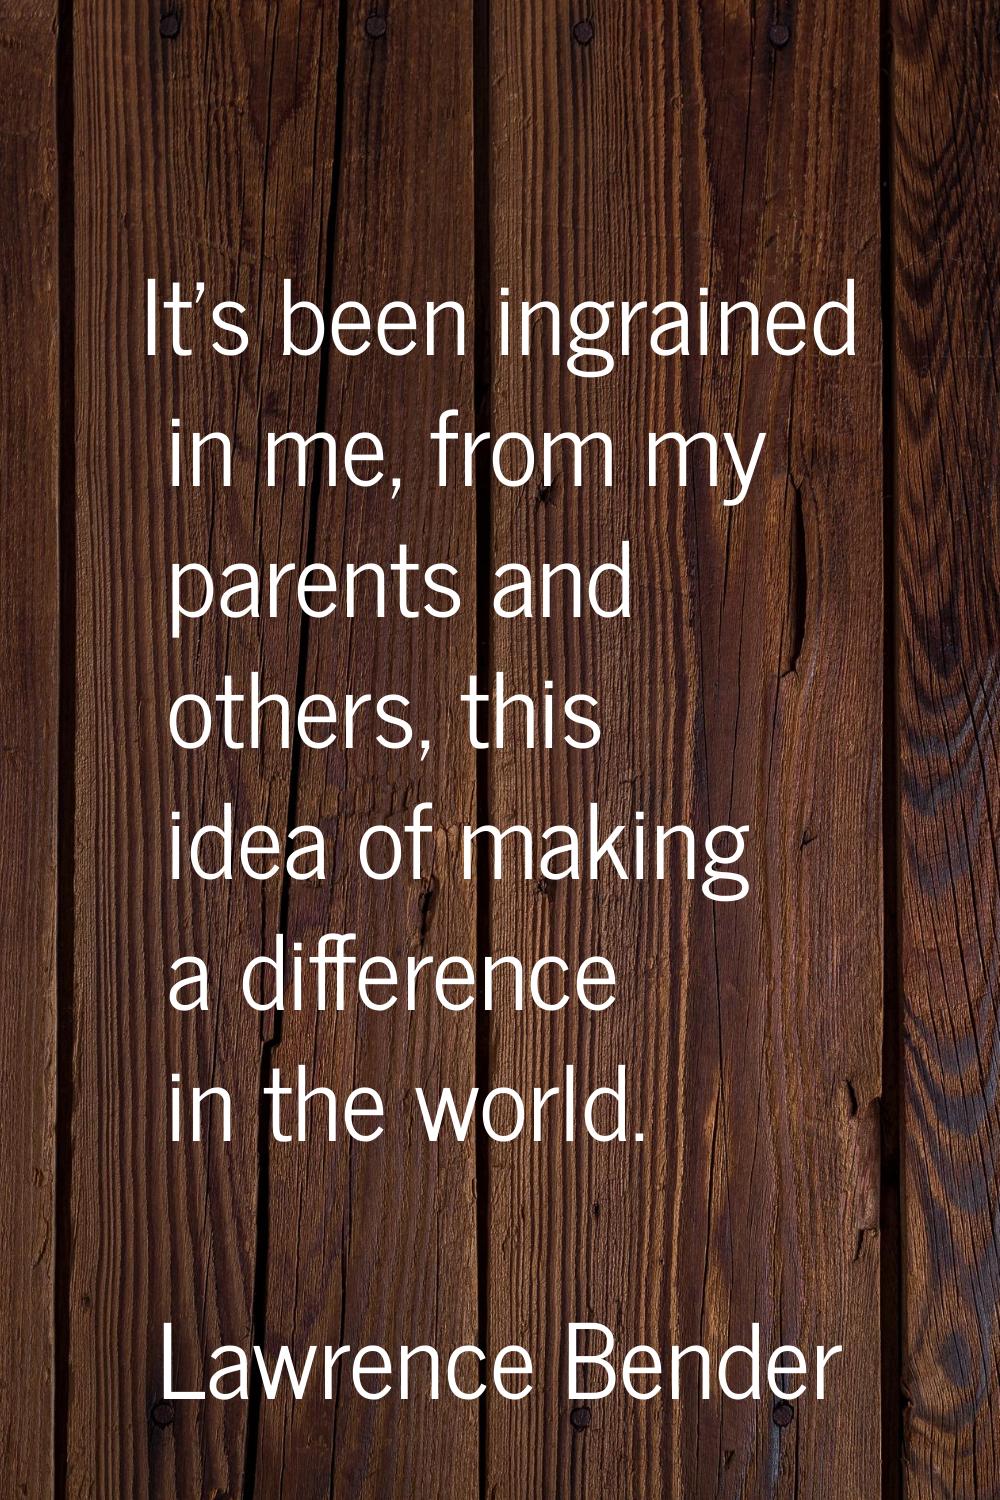 It's been ingrained in me, from my parents and others, this idea of making a difference in the worl